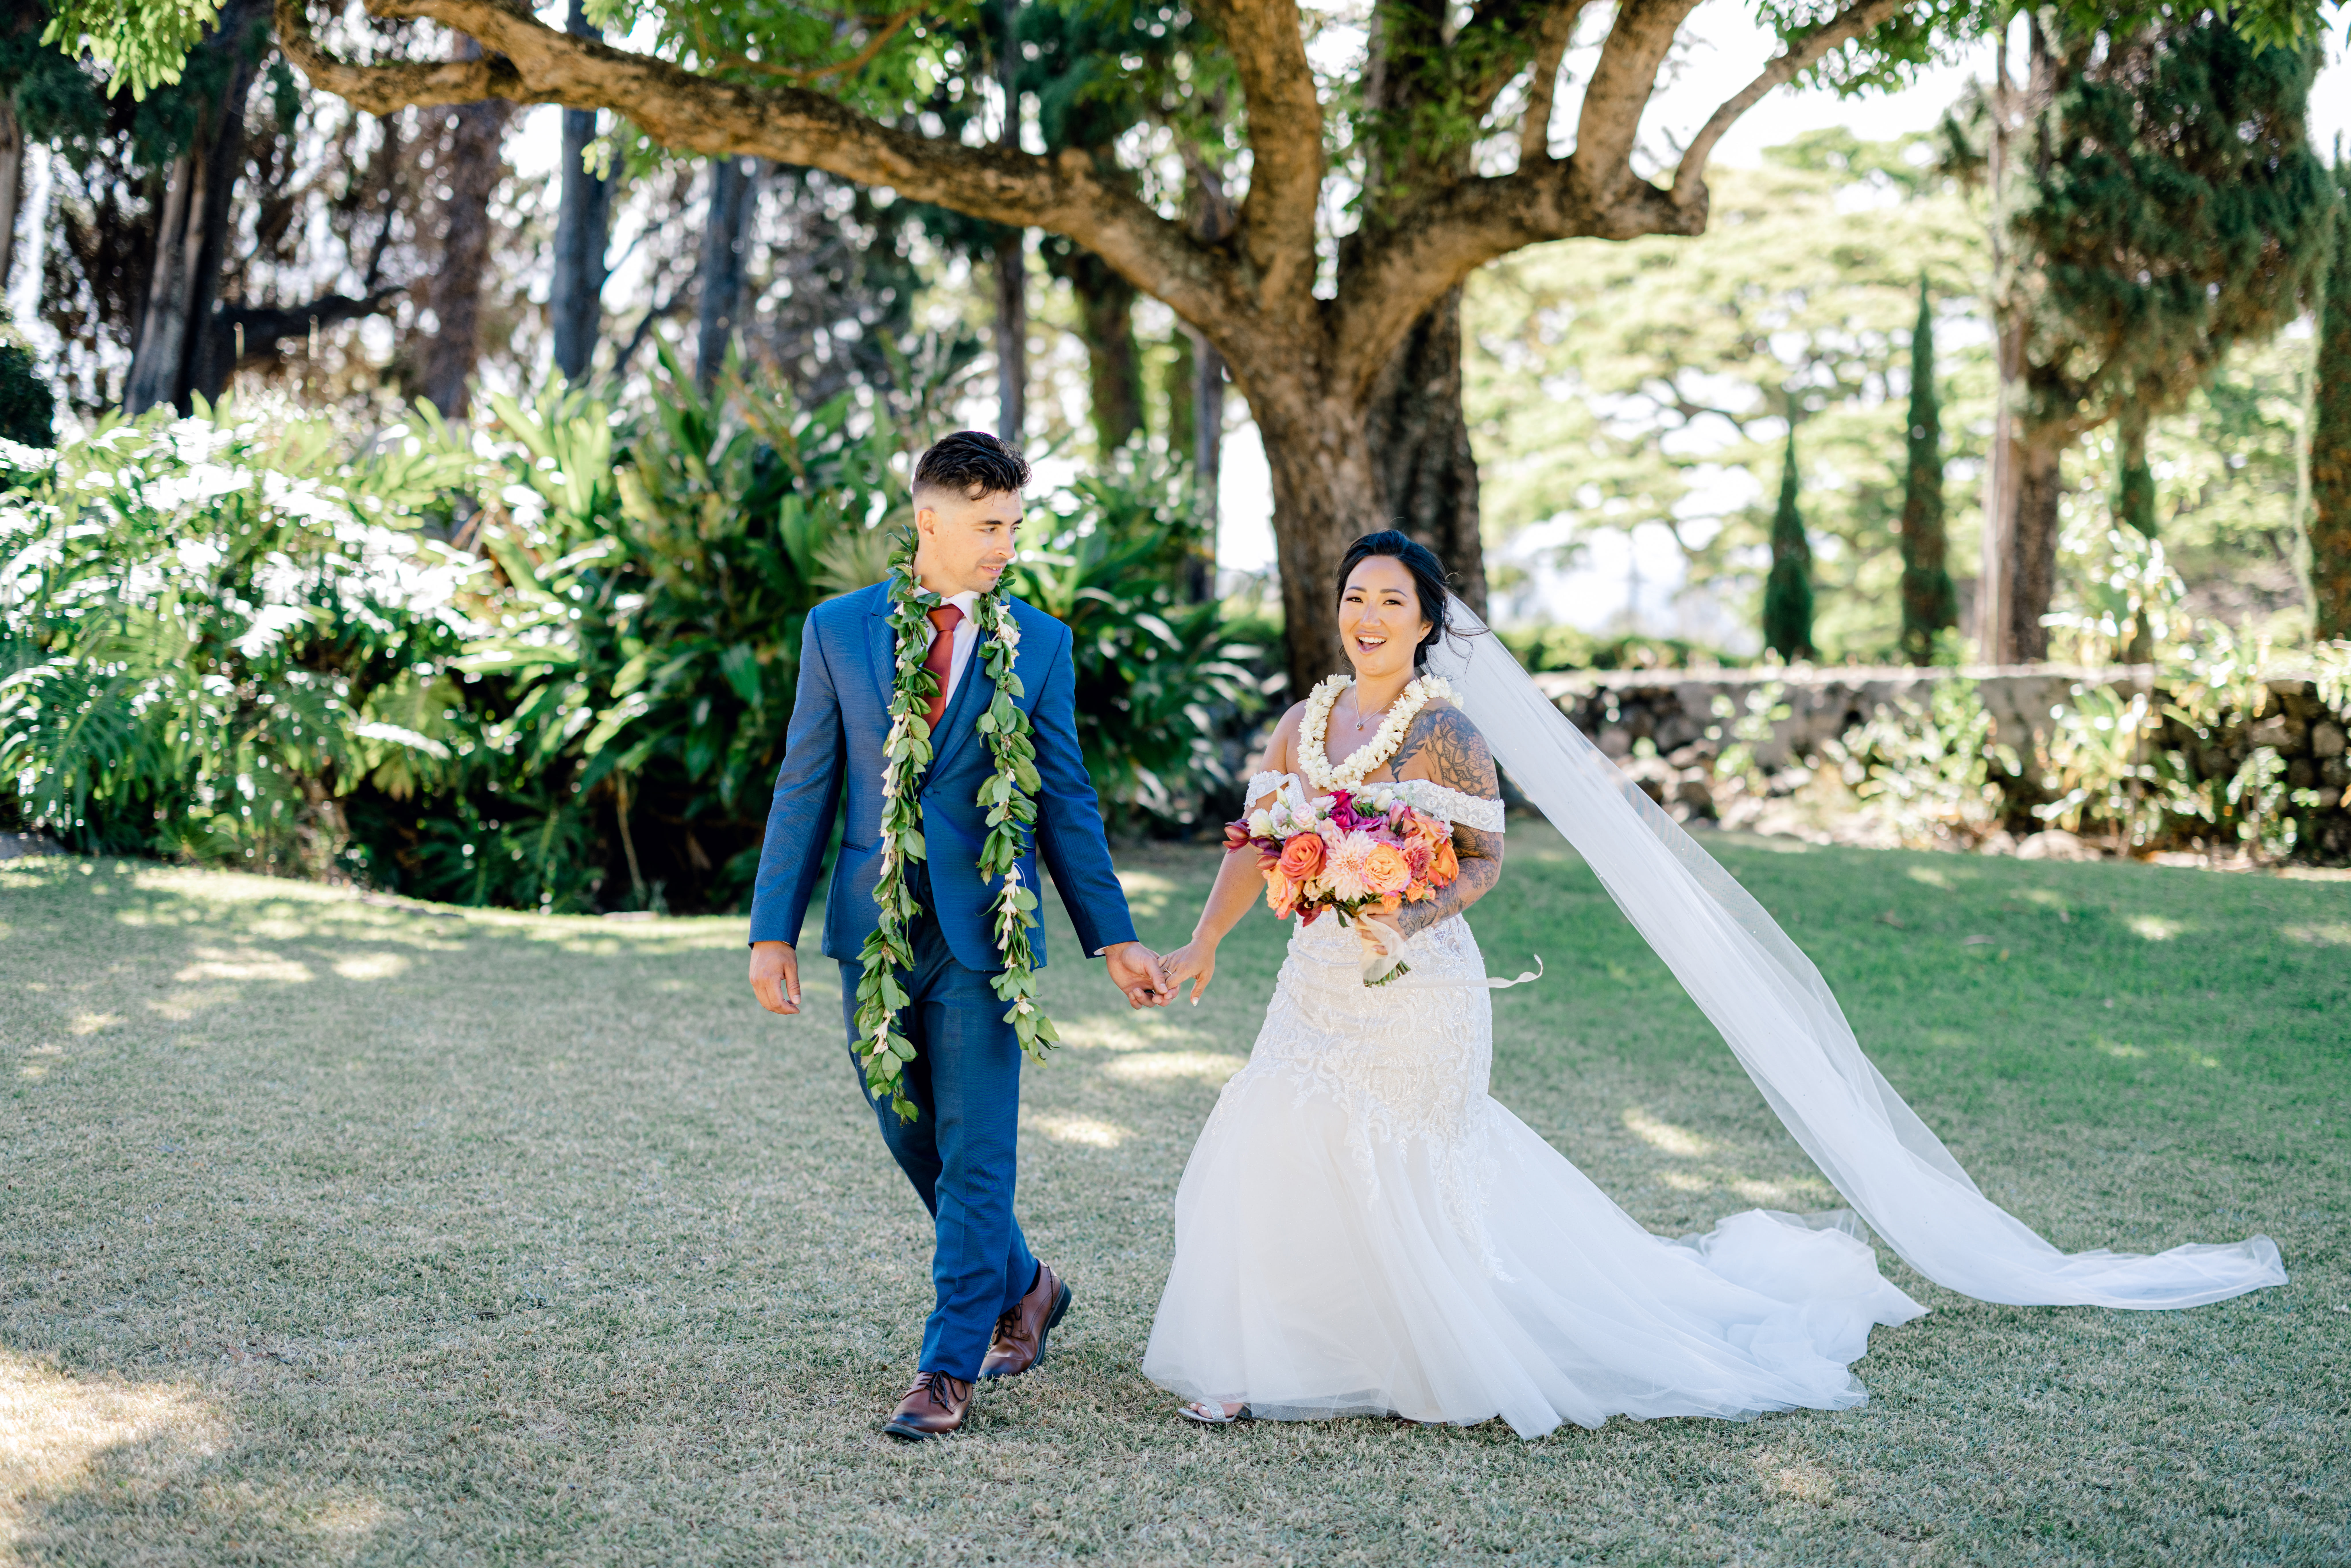 Female wearing a white wedding dress holding a colorful bouquet of flowers while standing next to man wearing a Maile lei looking at woman.